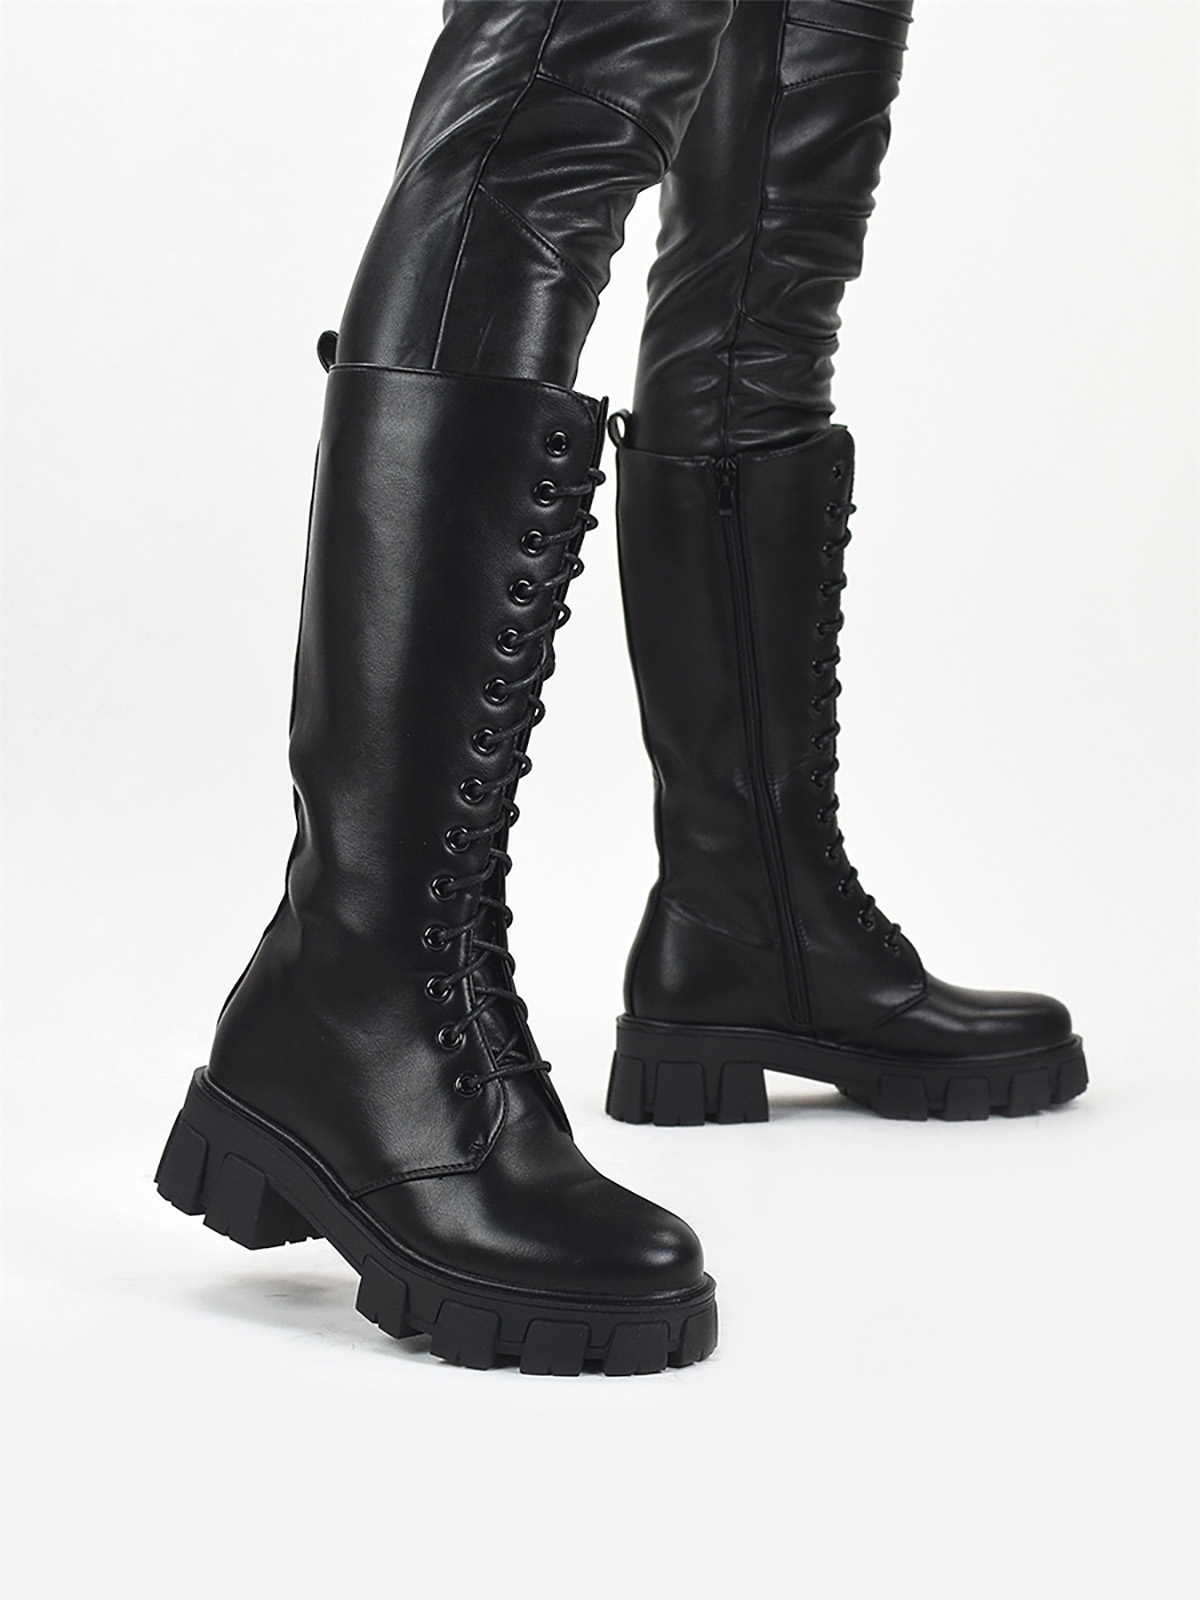 Women's high boots with laces in black